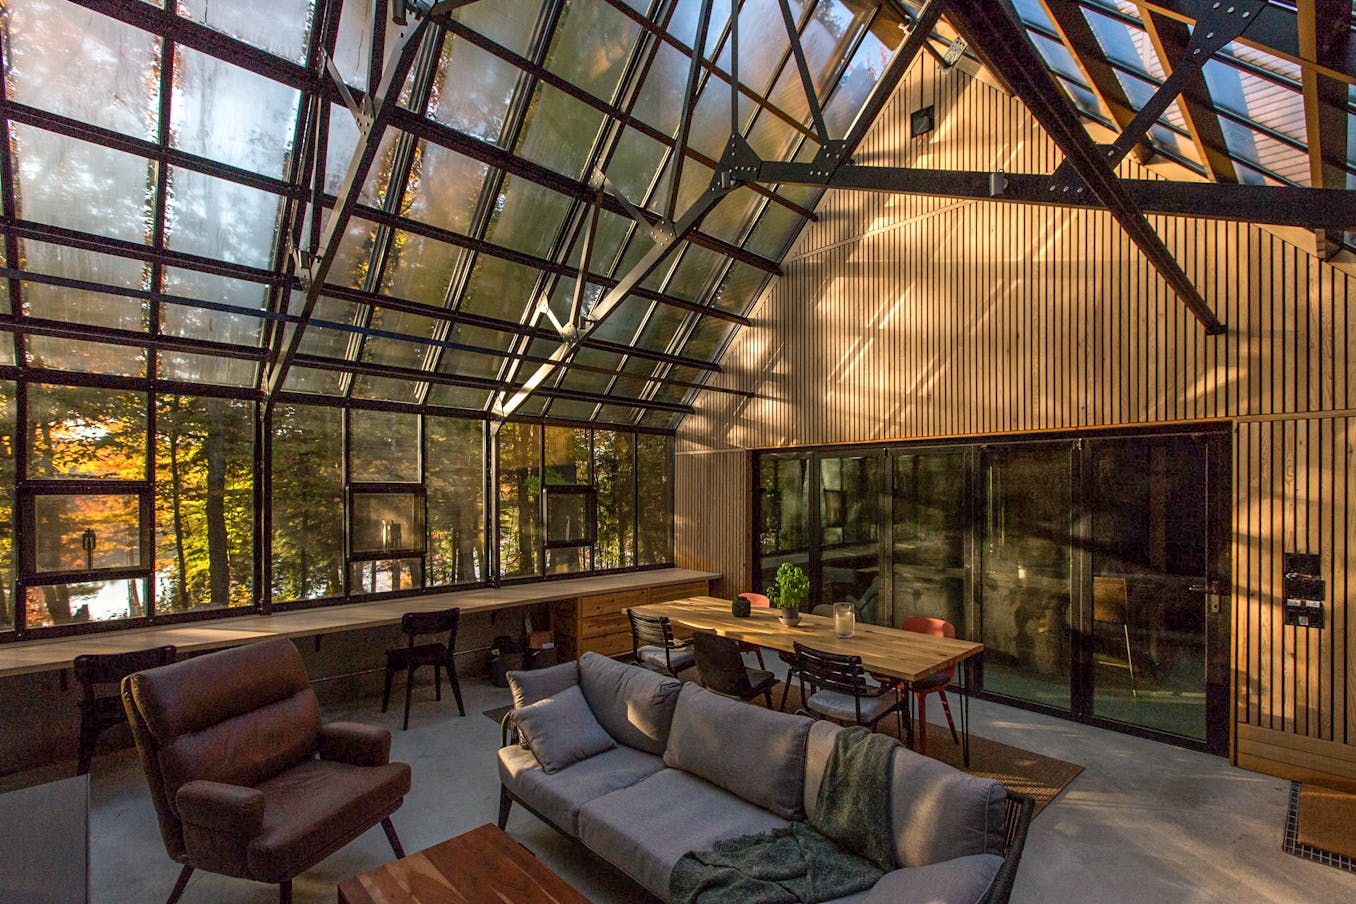 A greenhouse cottage with glass walls that offer a stunning view of the outdoors